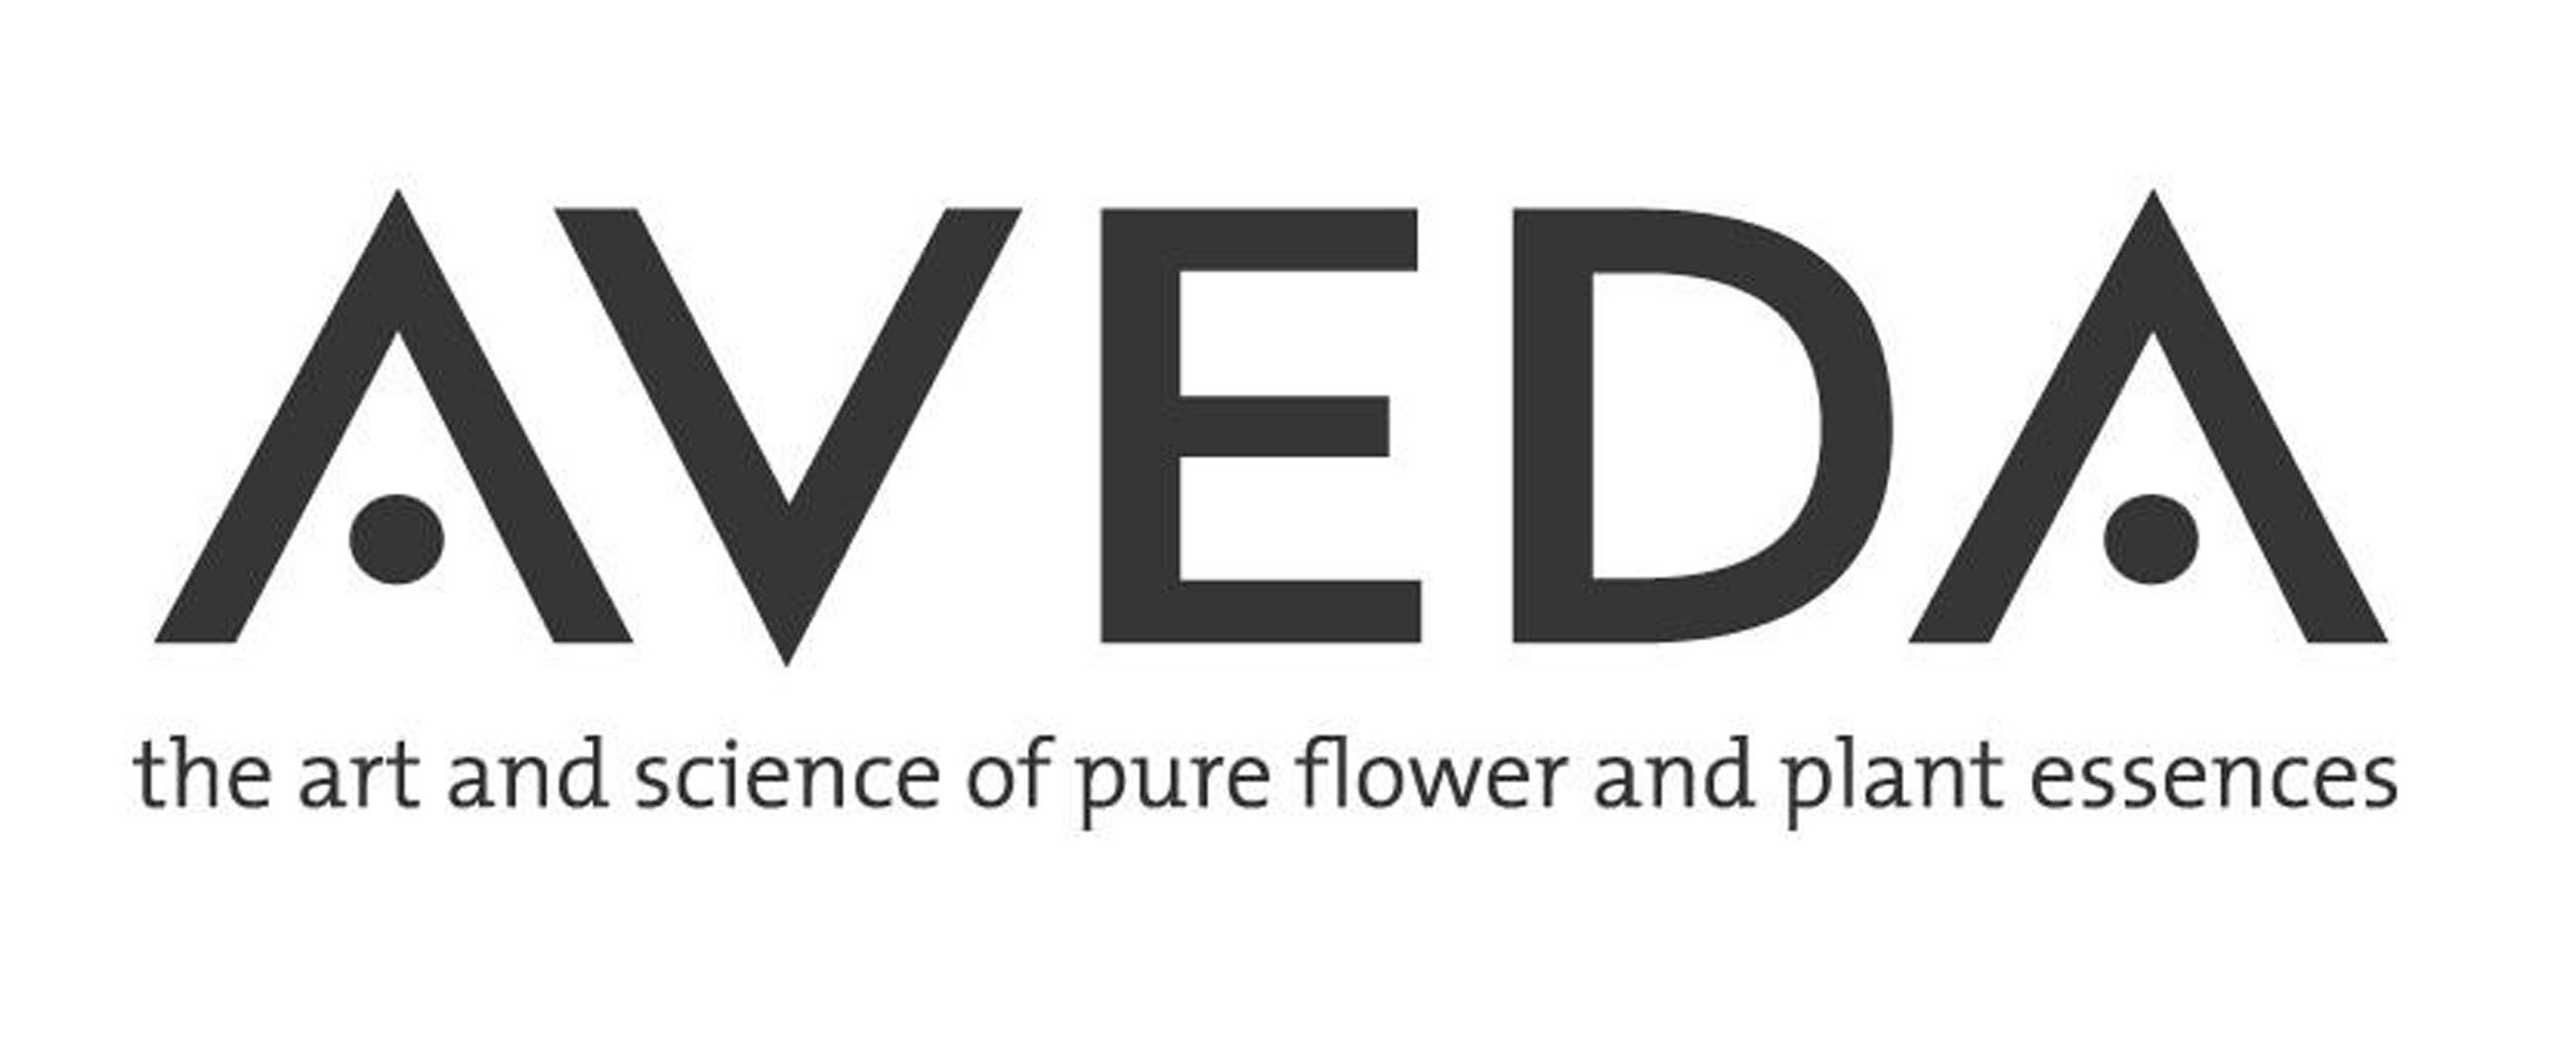 Aveda Sets Groundbreaking Standard in Sustainability for Beauty Industry Image